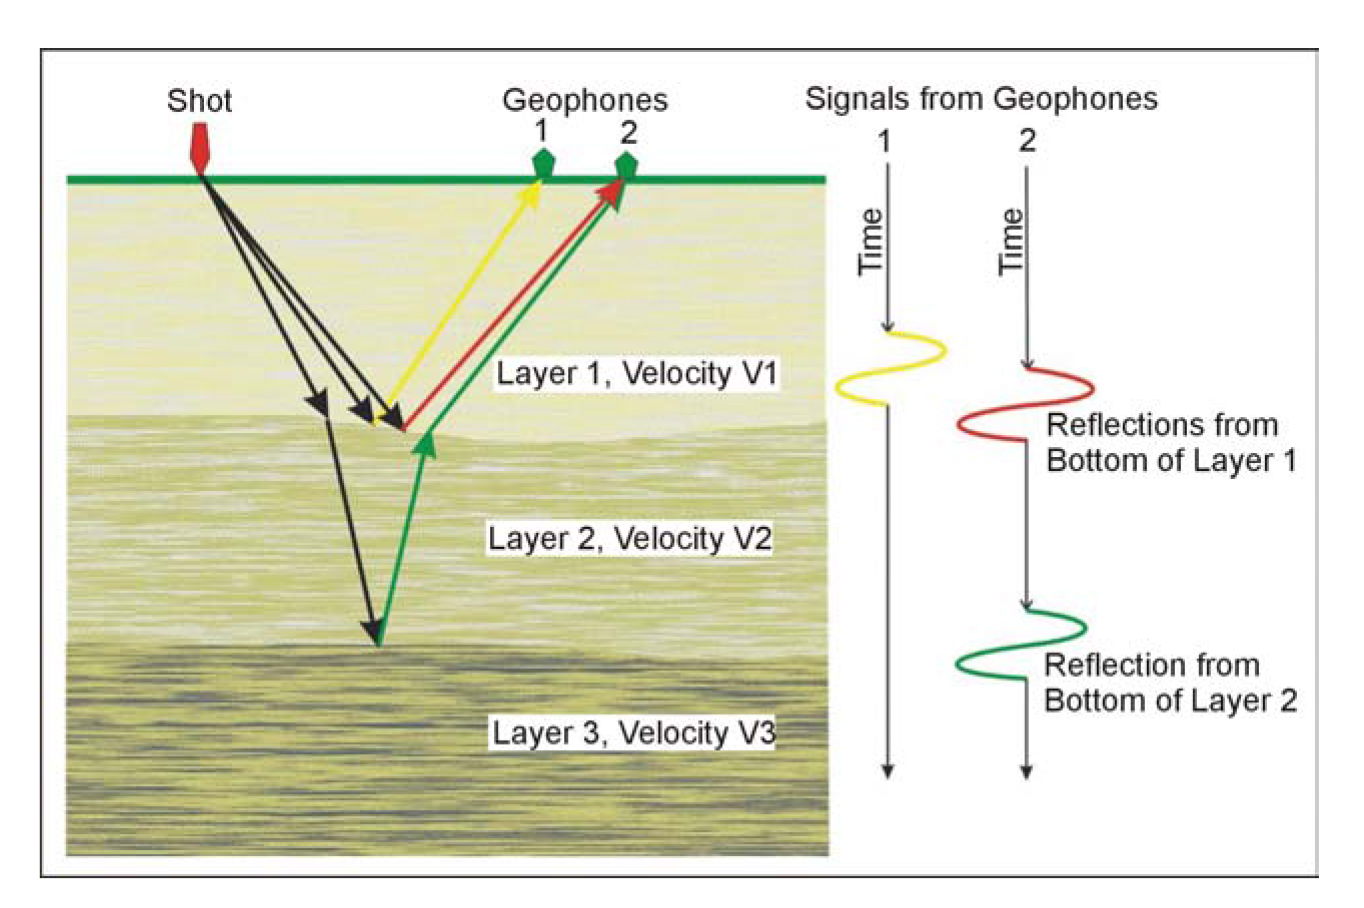 The Seismic Reflection methods.